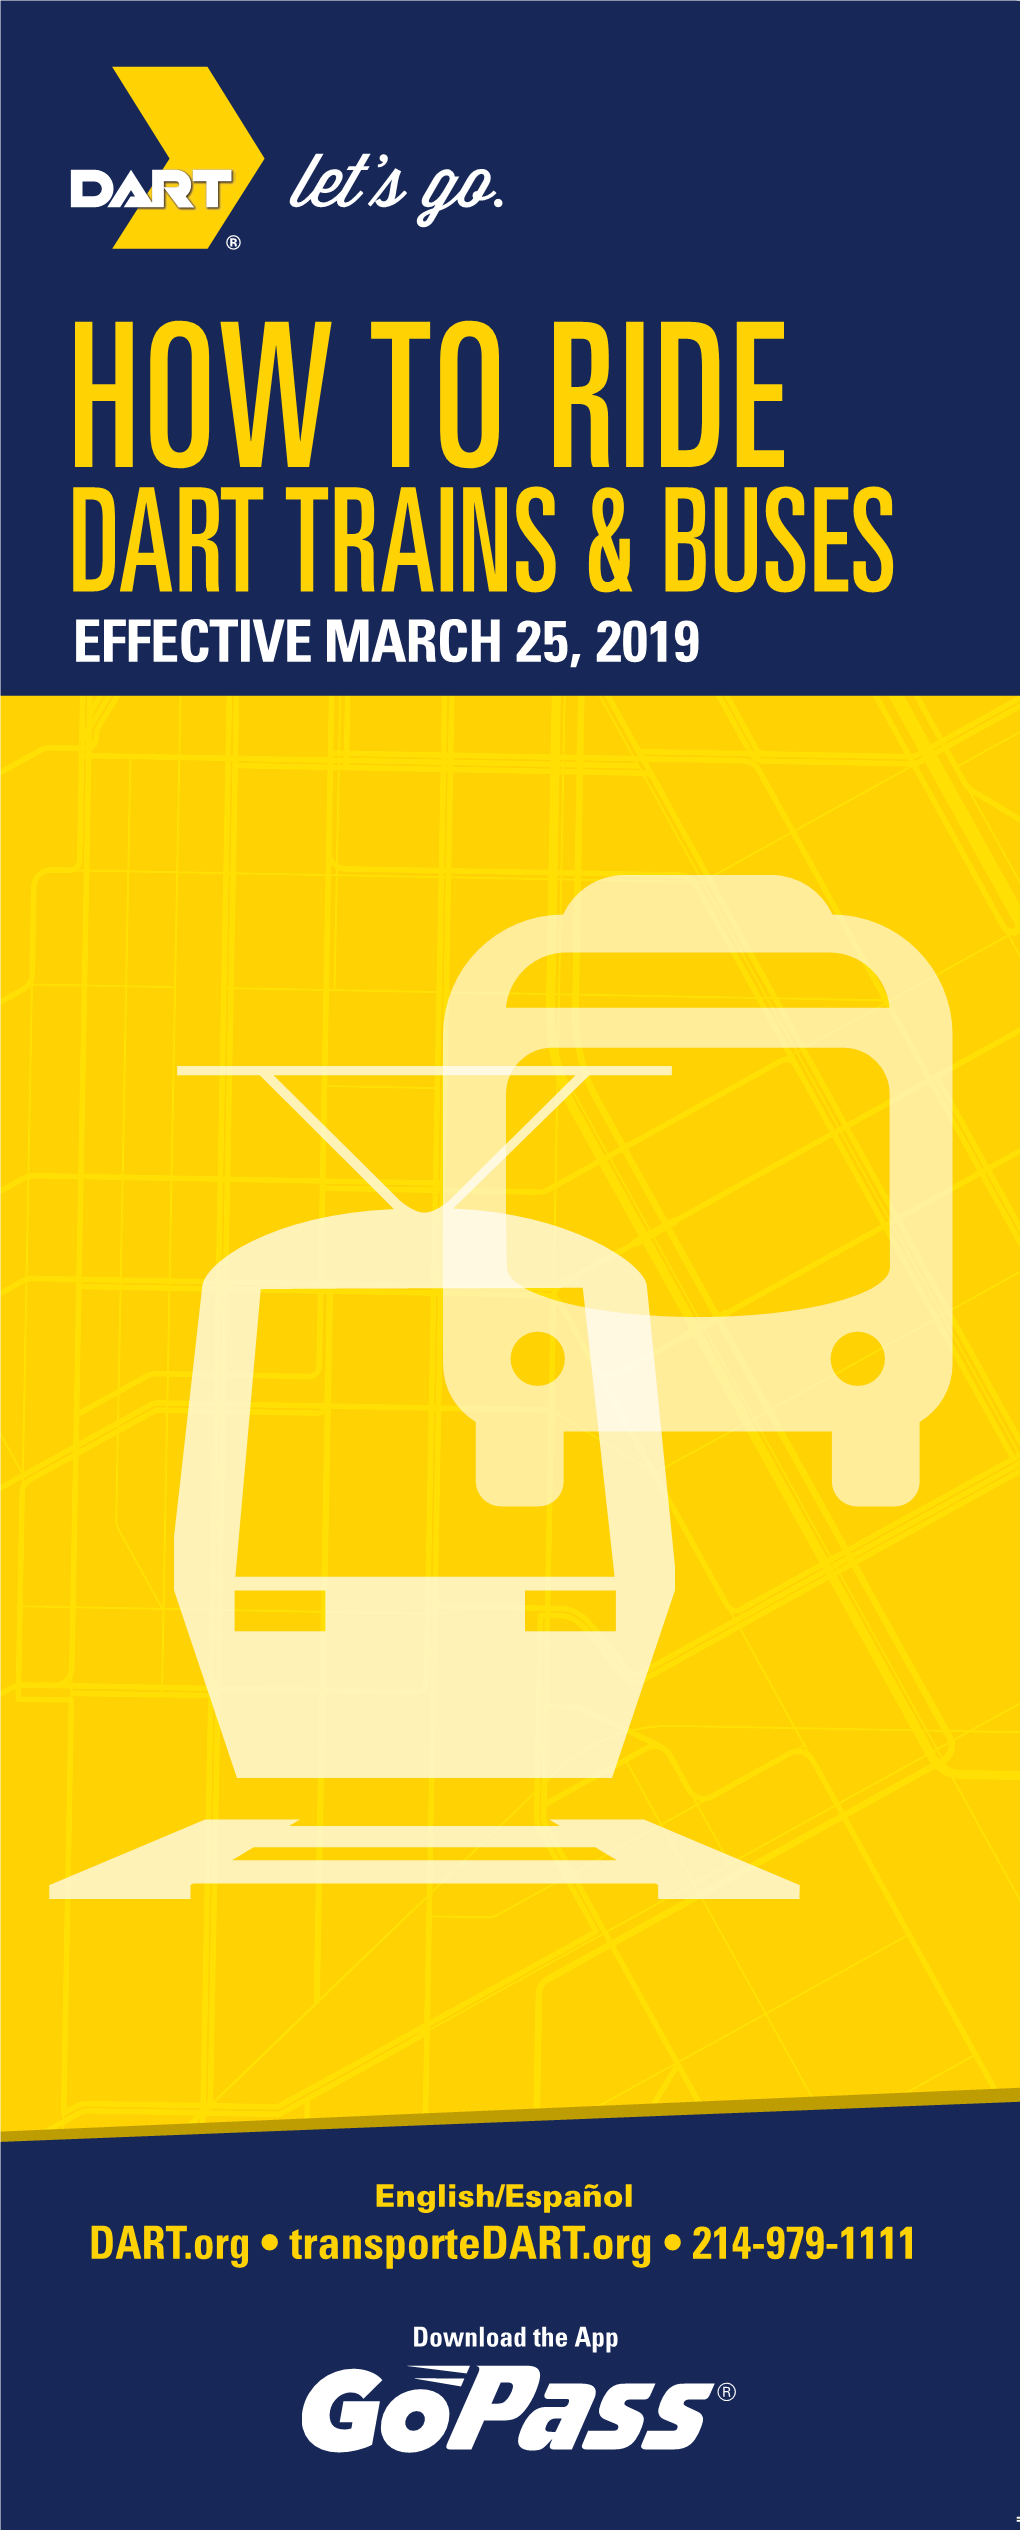 How to Ride Dart Trains & Buses Effective March 25, 2019